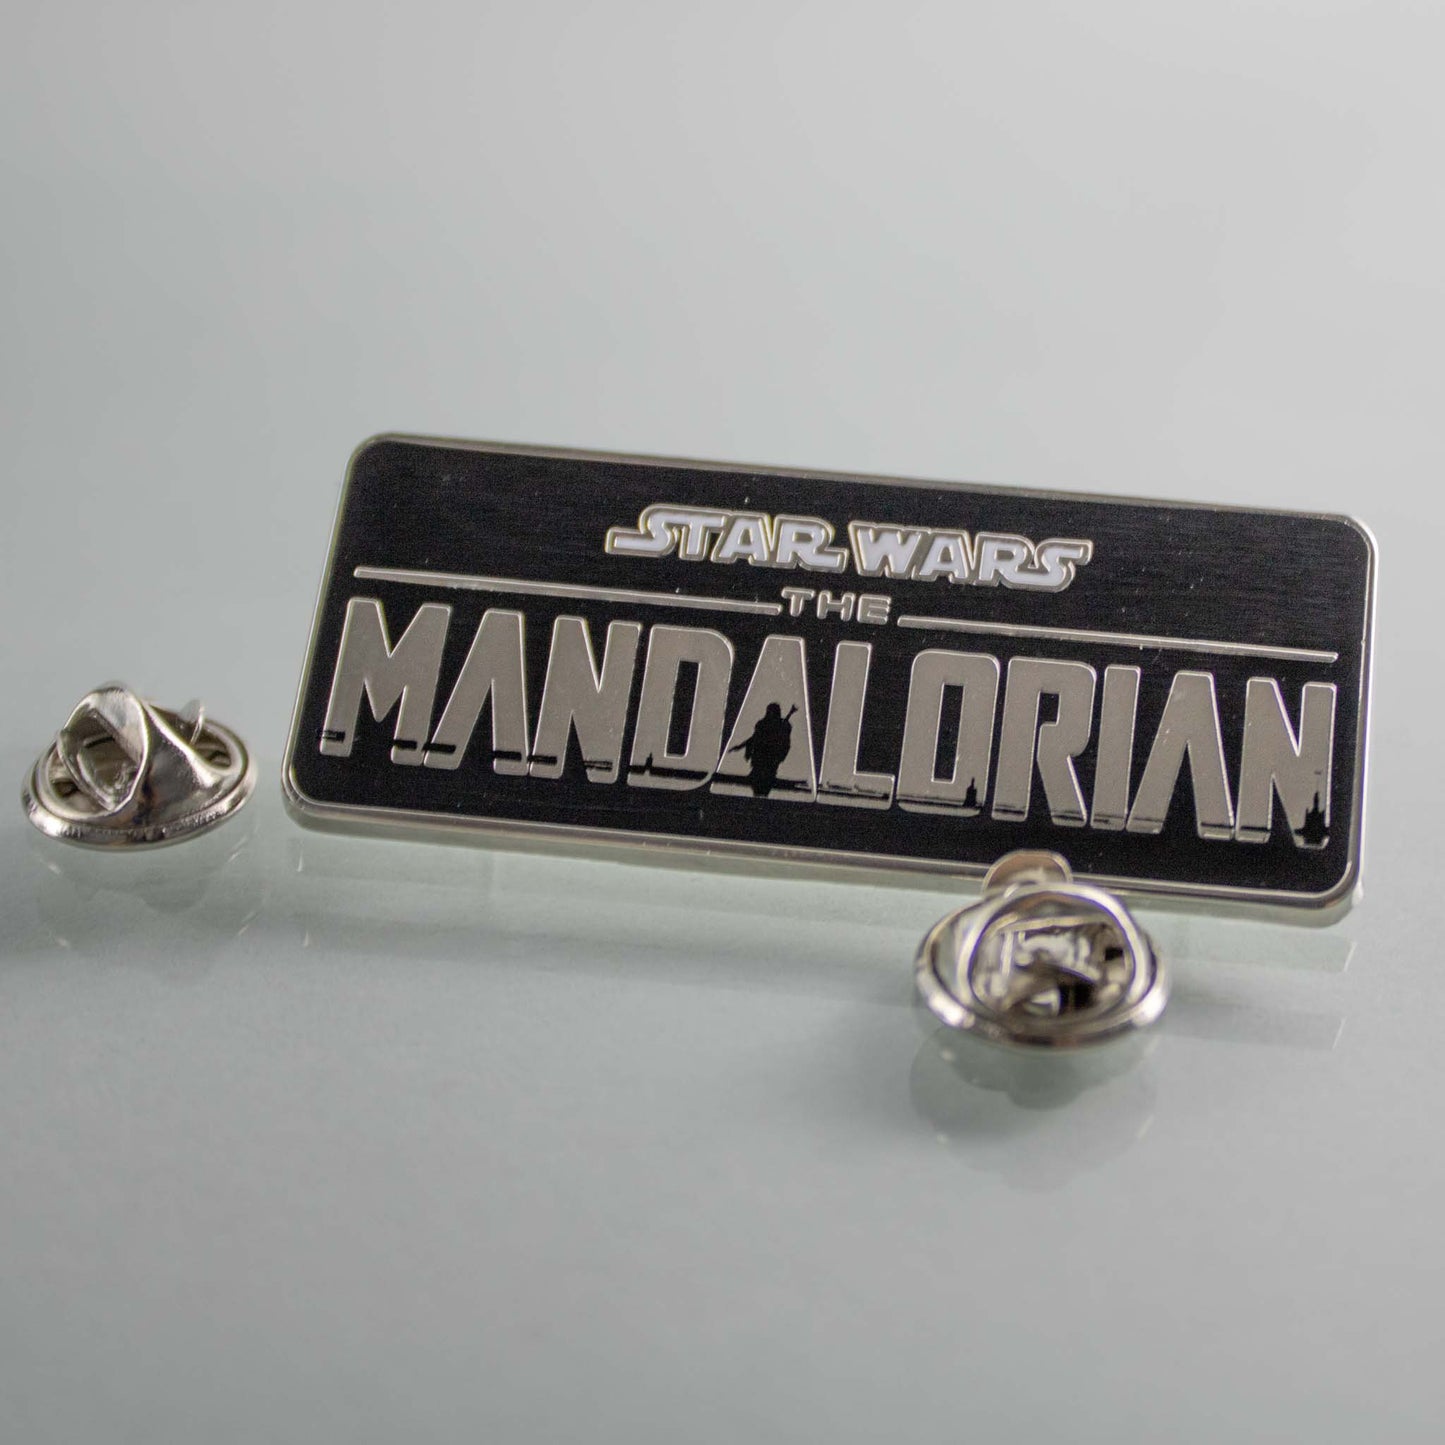 Star Wars The Mandalorian Logo EE Exclusive Enamel Pin by Loungefly